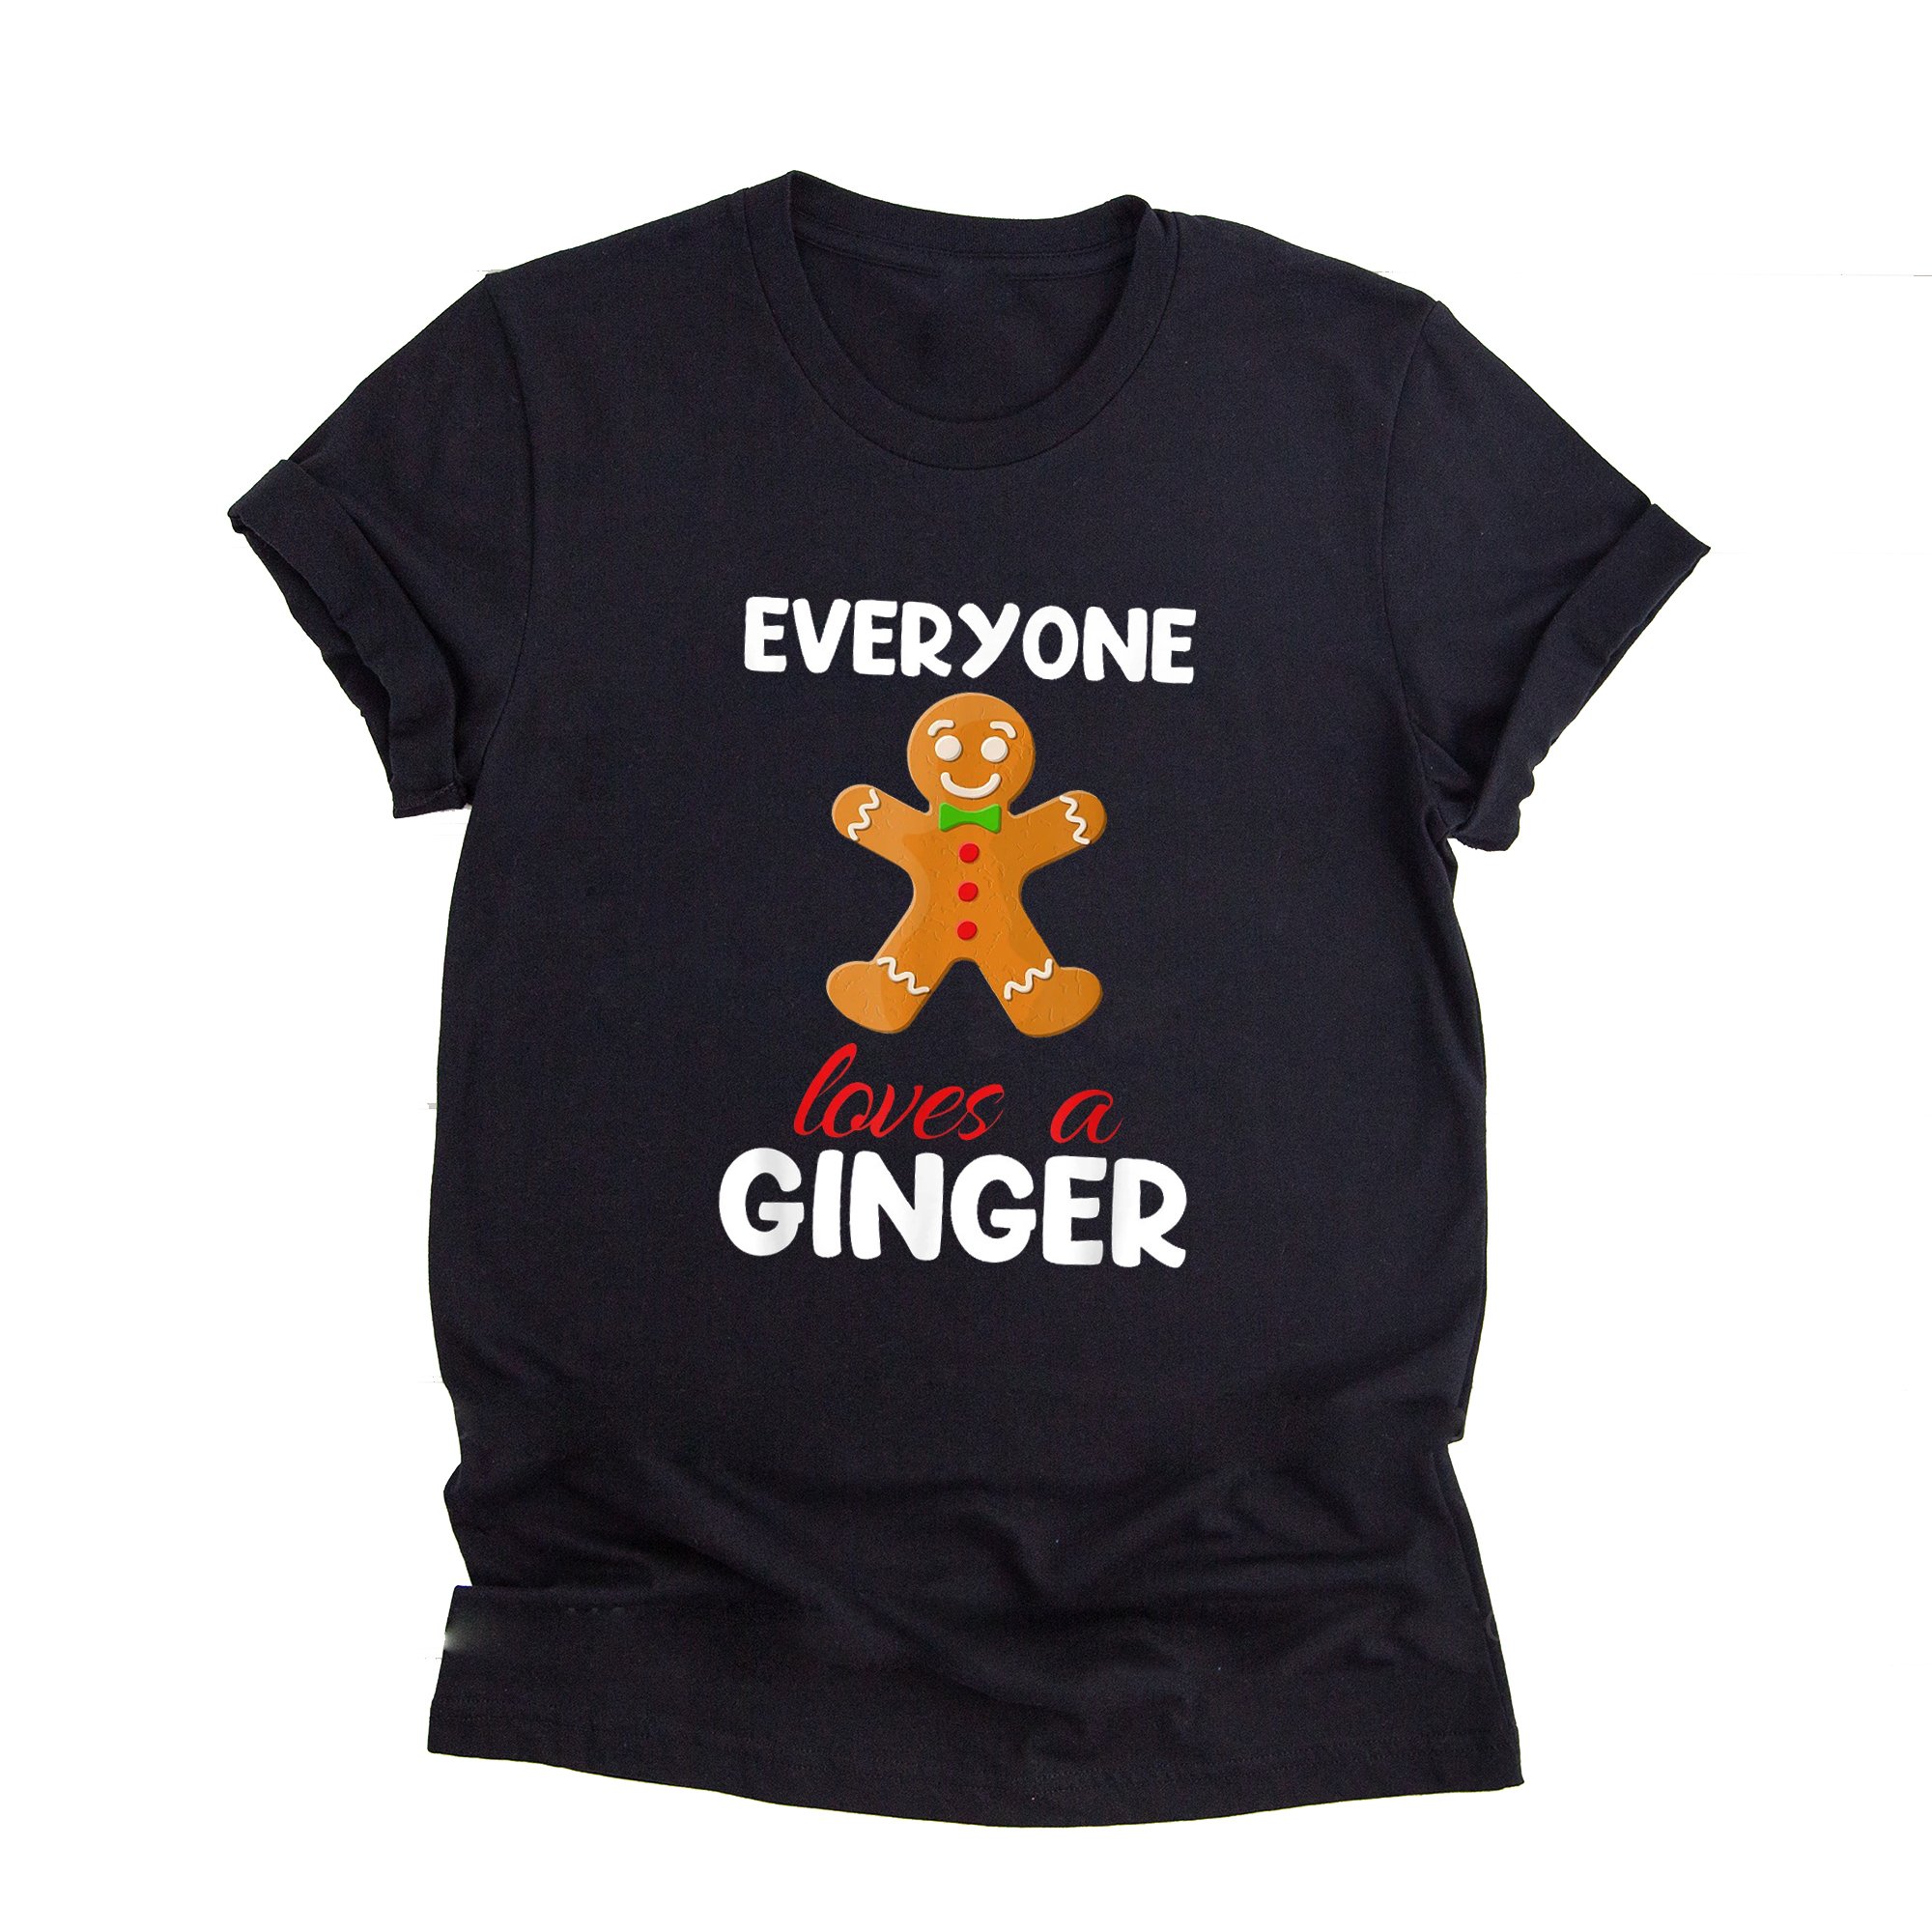 Merry christmas ginger everyone love a ginger t-shirt, ginger snap, ginger christmas jumper, cute gingerbread sweater, funny gingerbread christmas sweater, GST